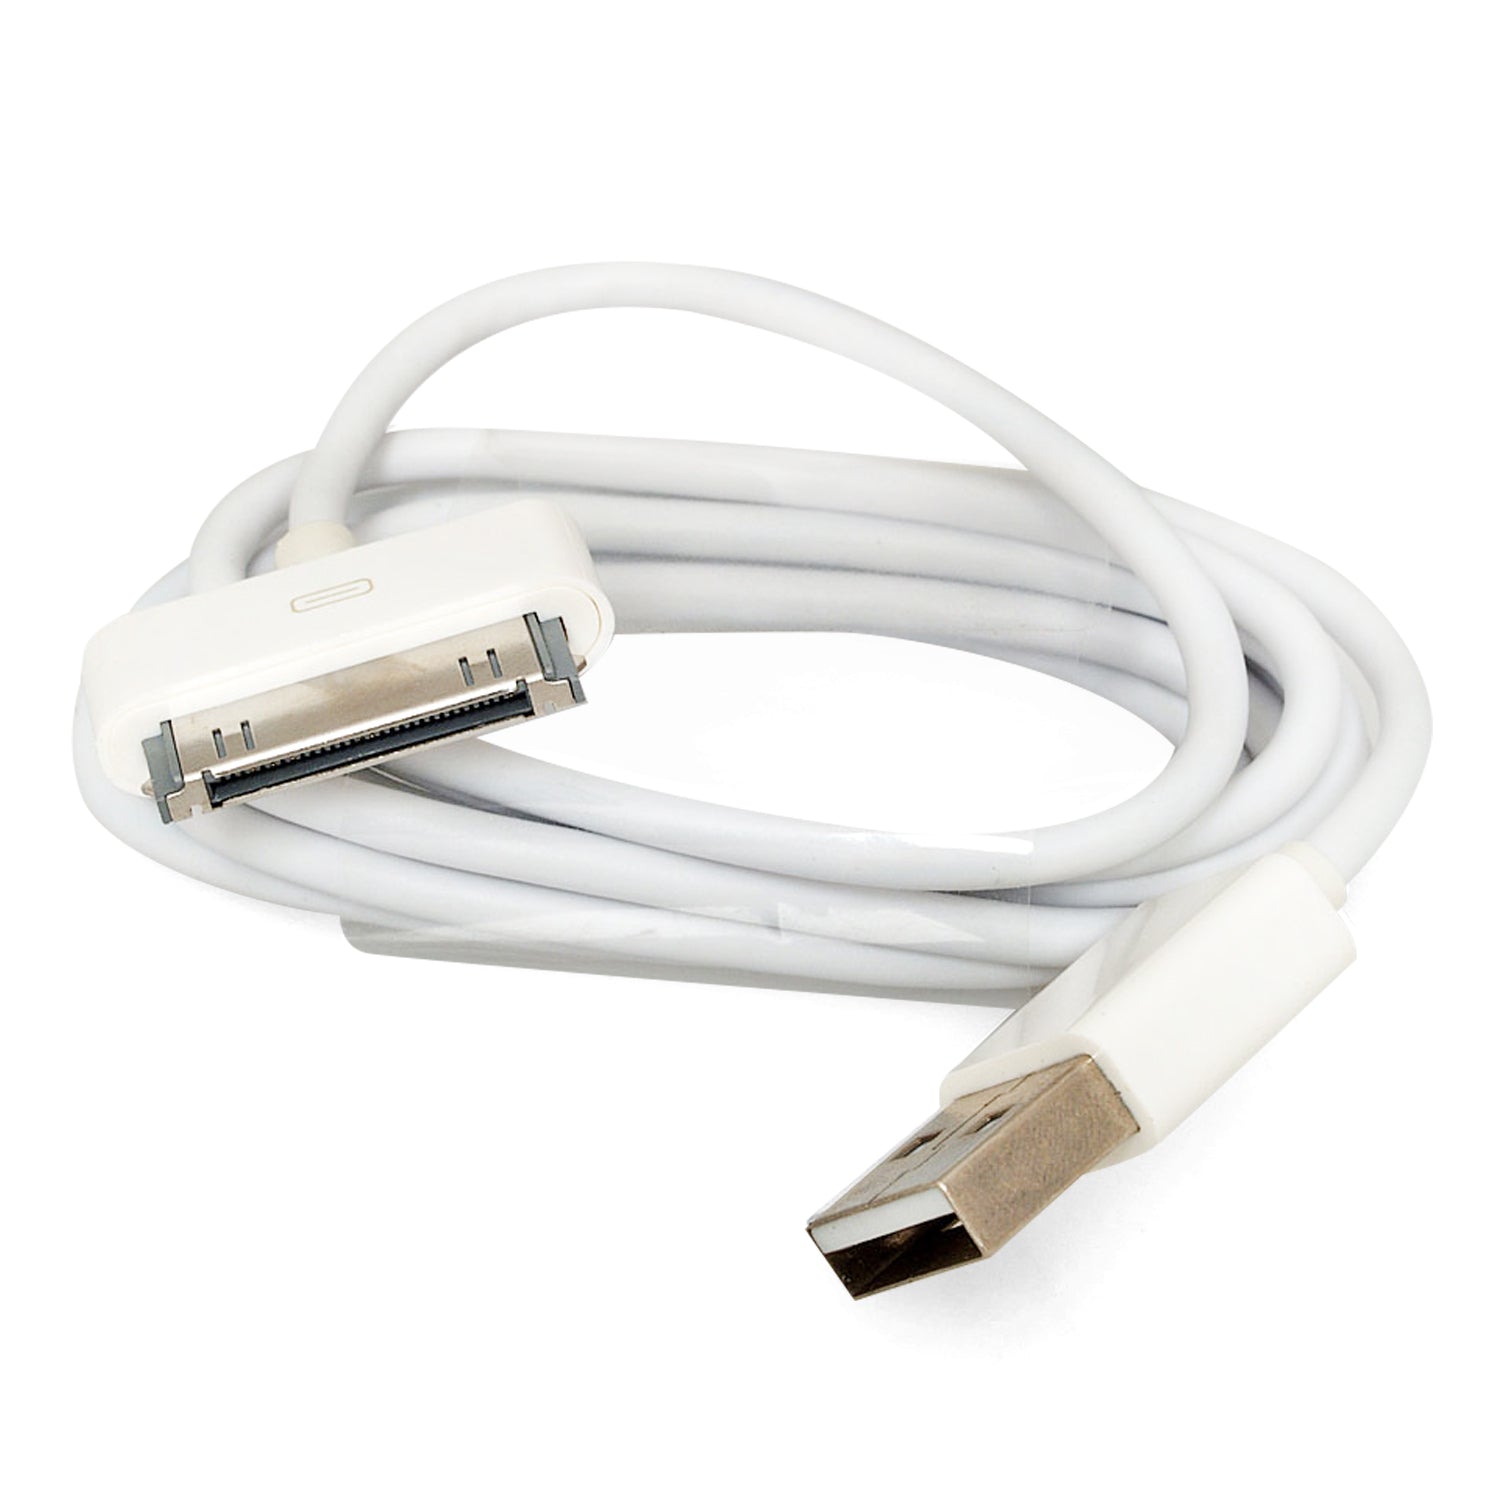 6-MA2410 DC Cable 3FT For iP4/iPAD